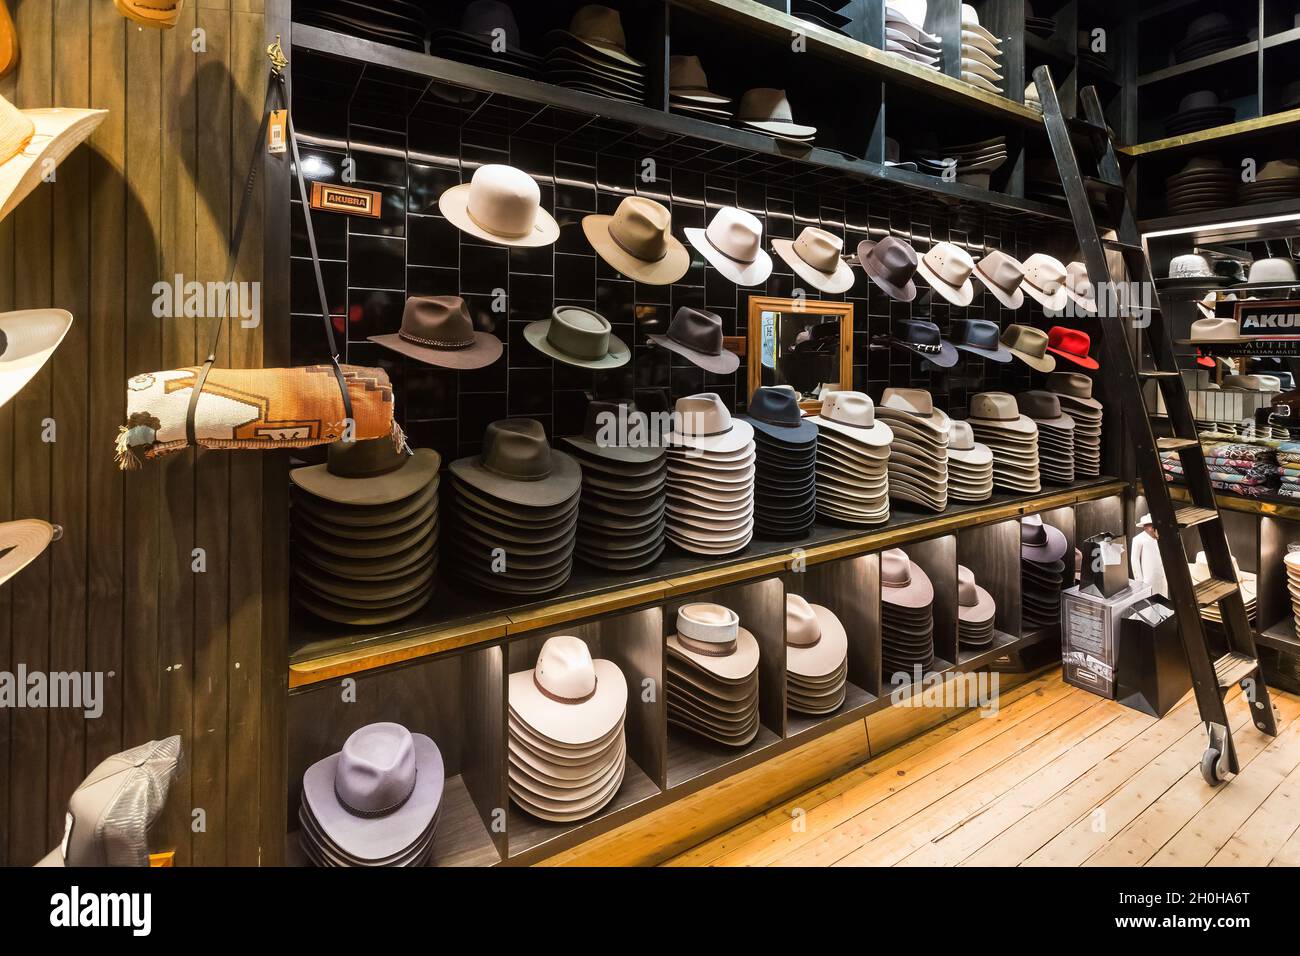 old akubra hat and R M Williams boots outback Australia dsc 2362 Stock  Photo - Alamy